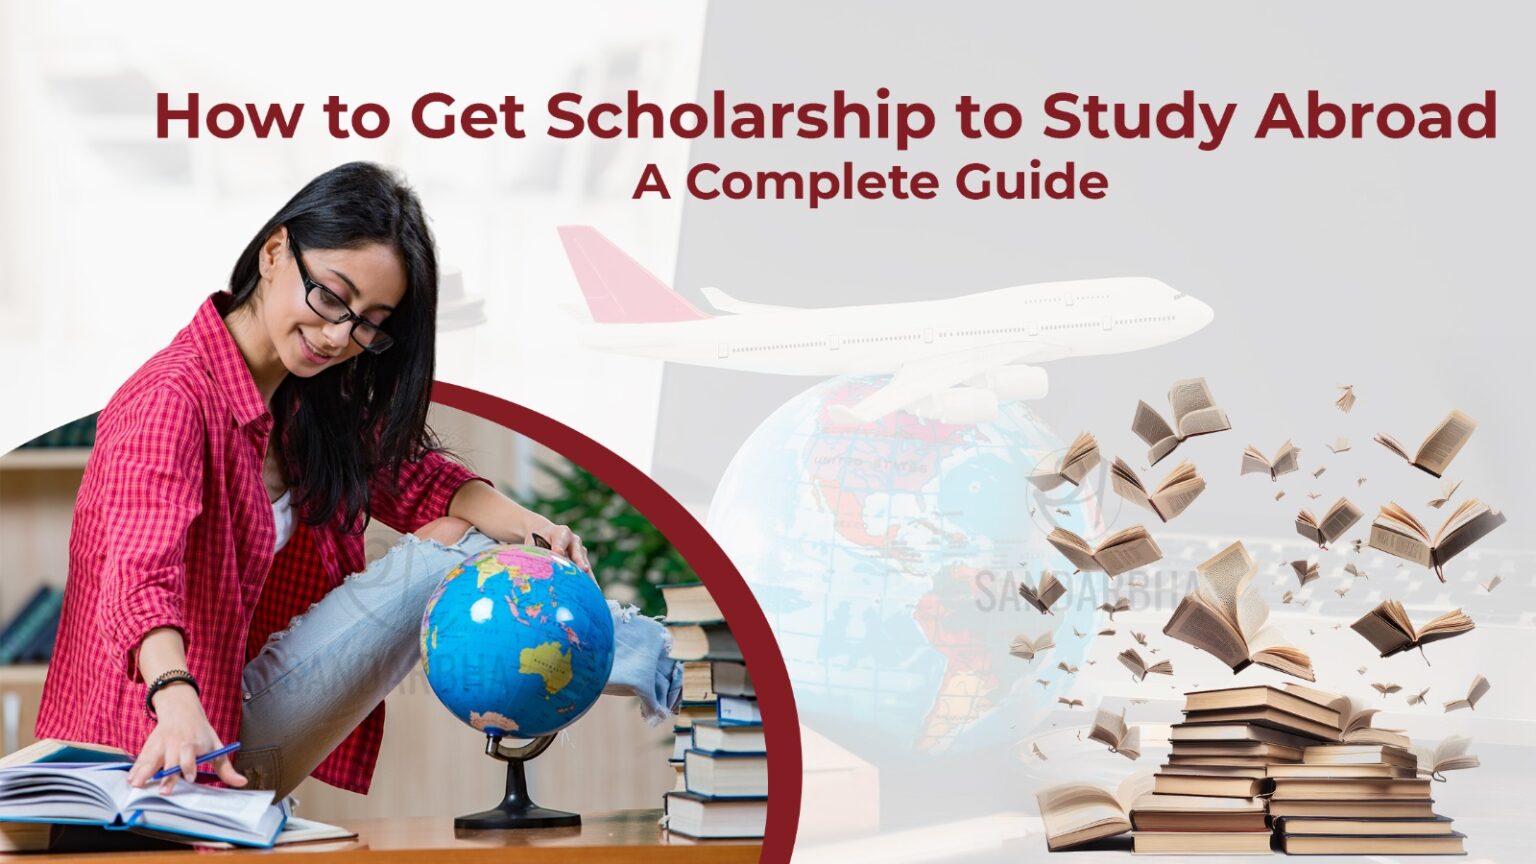 Select How to Get Scholarship to Study Abroad